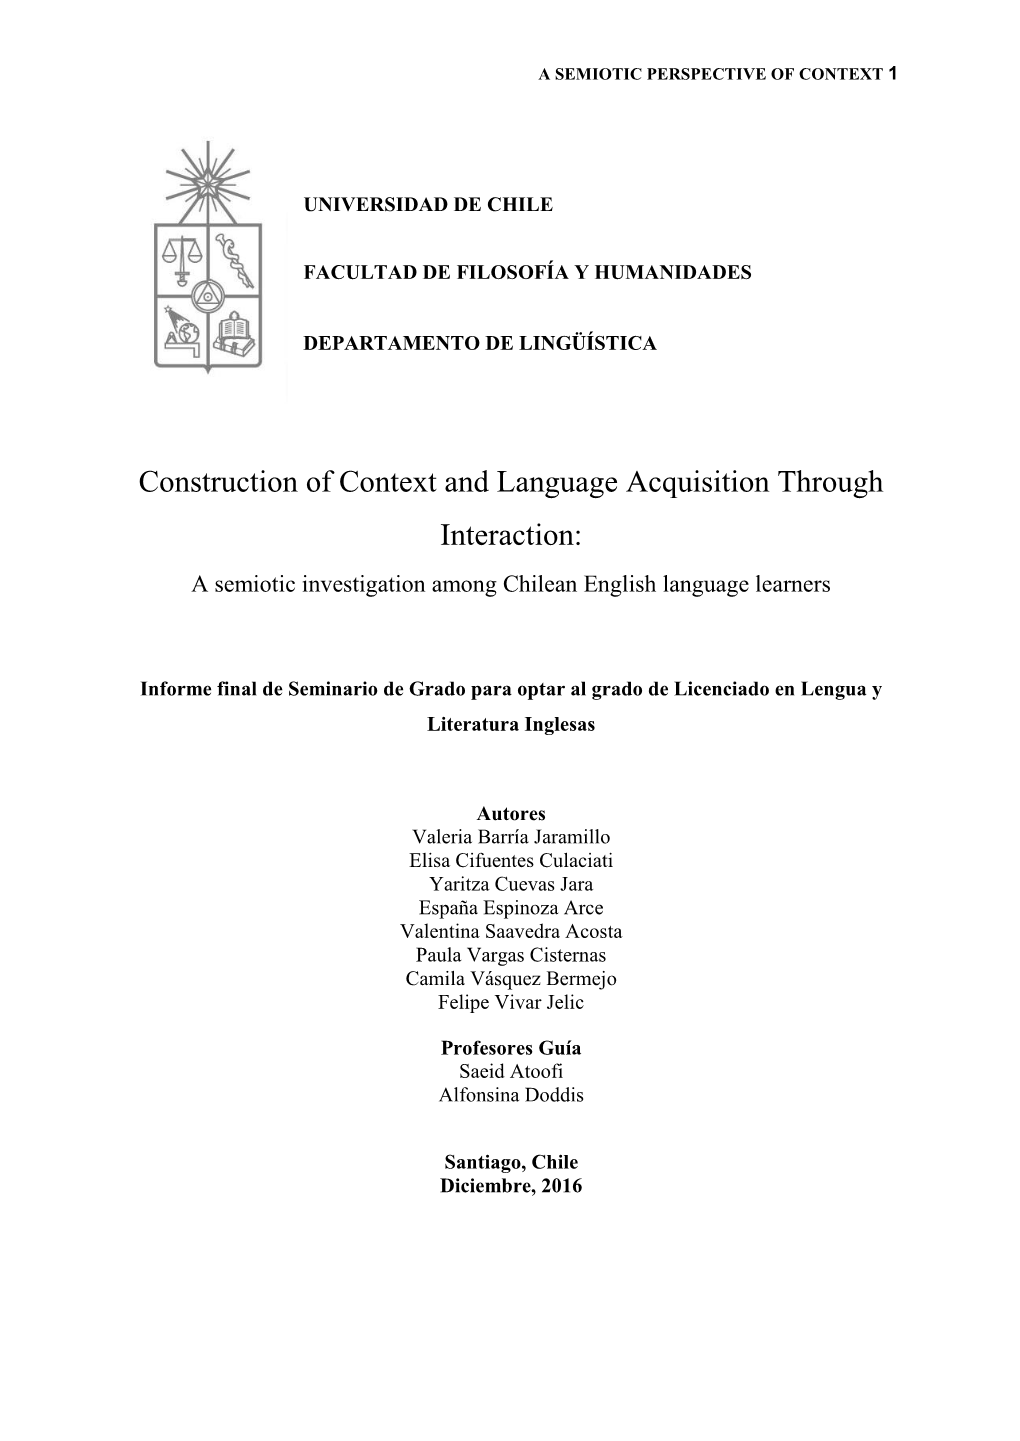 Construction of Context and Language Acquisition Through Interaction